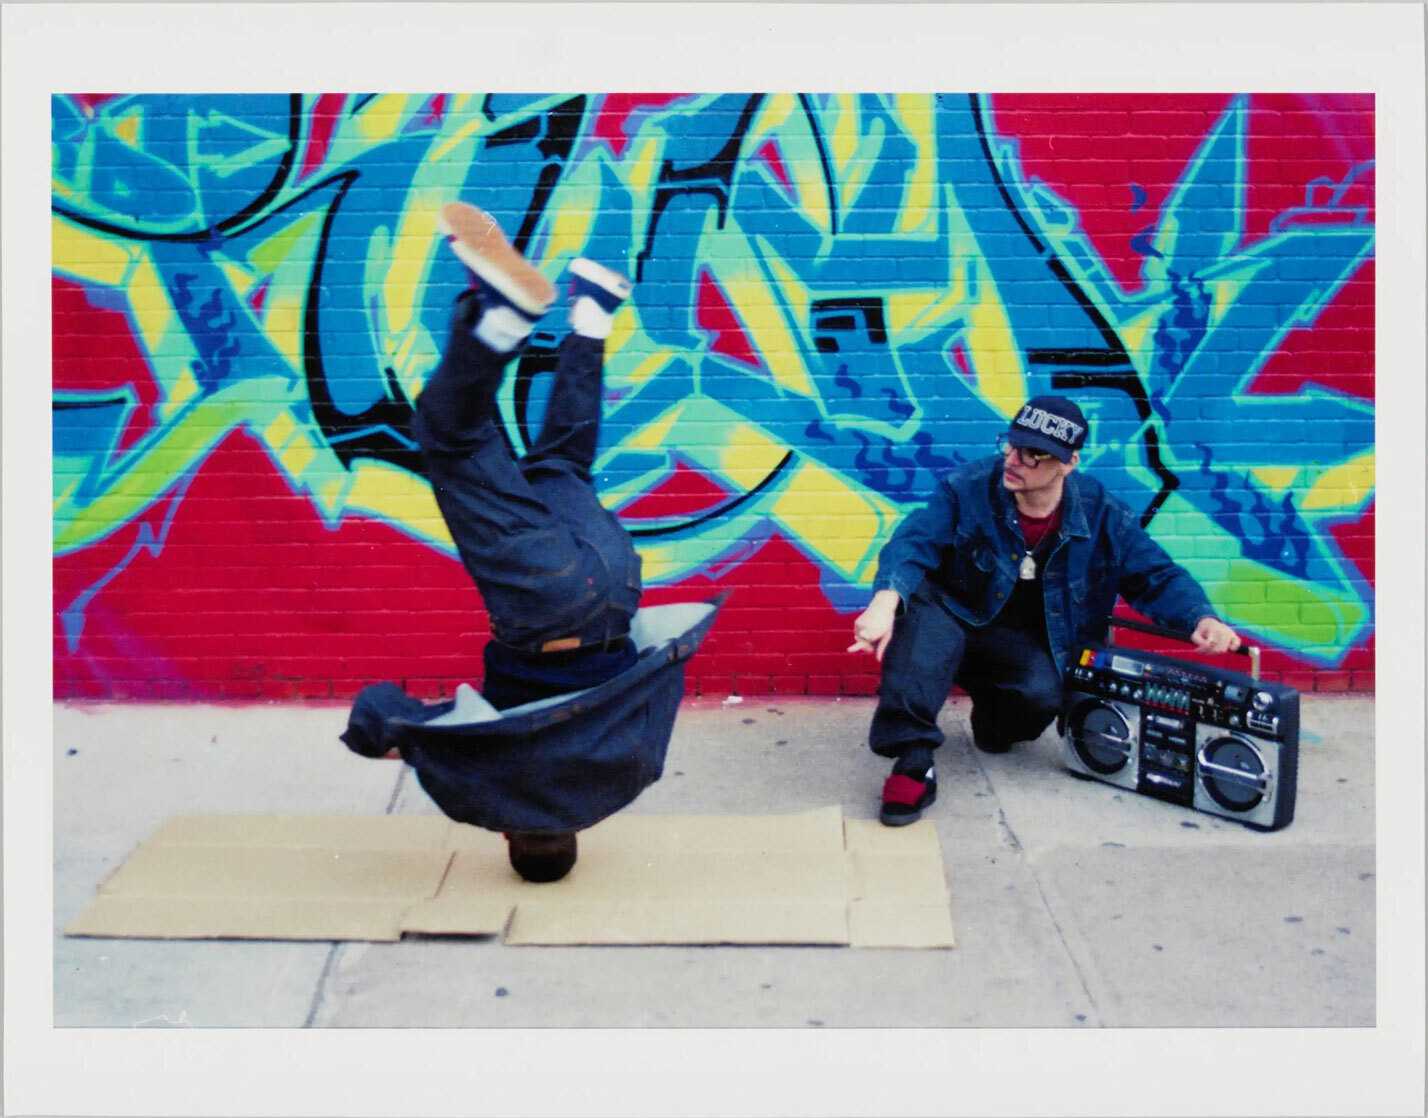 Image of male dancer doing a head spin in front of a mural with another man operating a audio system